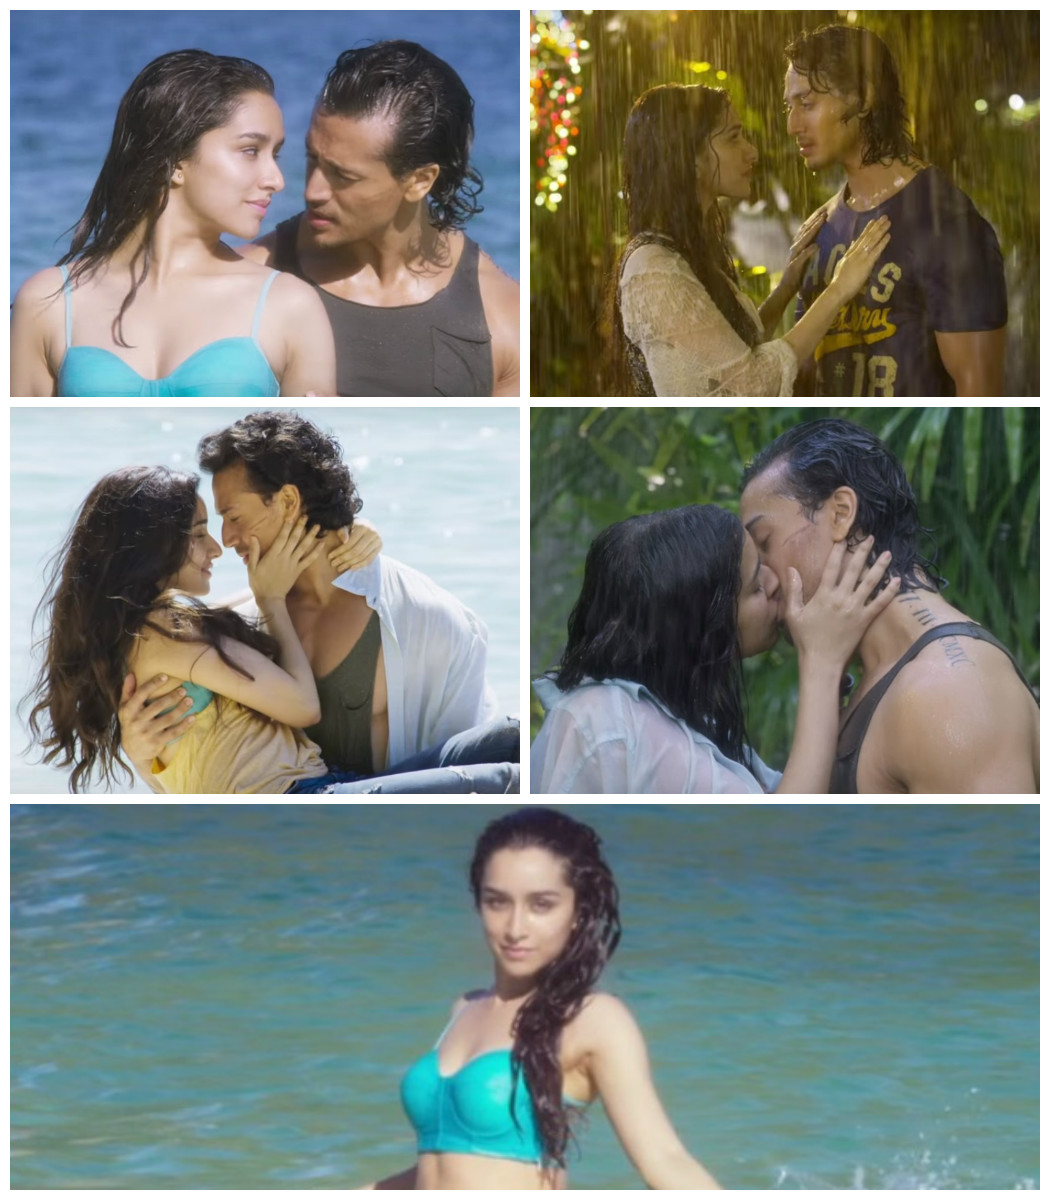 Box Office Report: Baaghi Has a Successful 1st Week